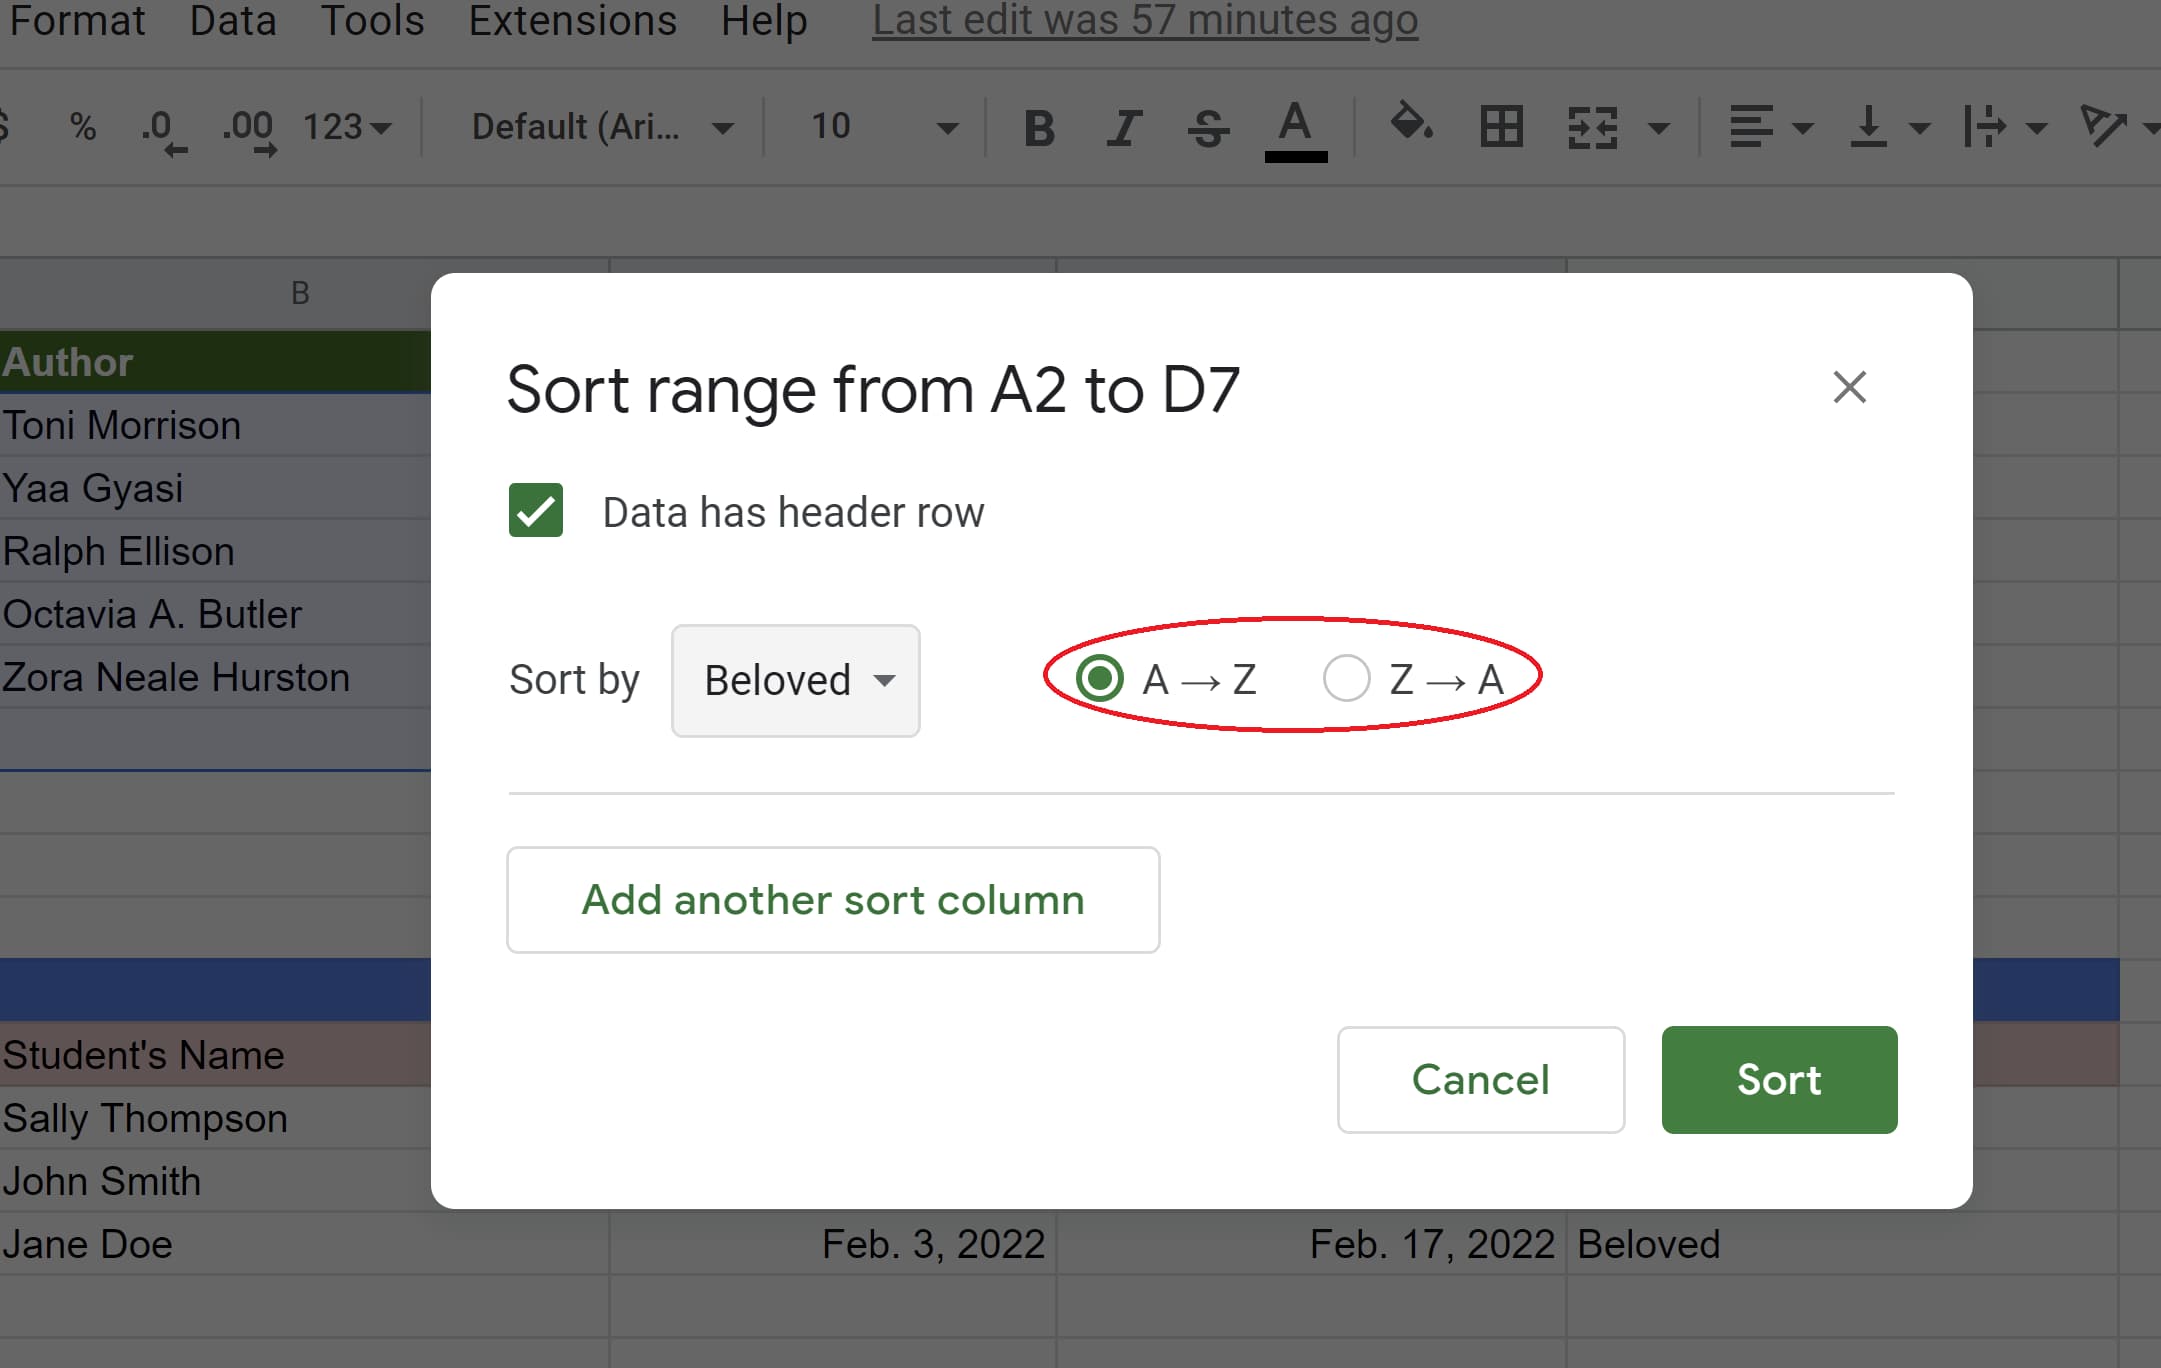 A-Z option selected to sort data in ascending order in Google Sheets